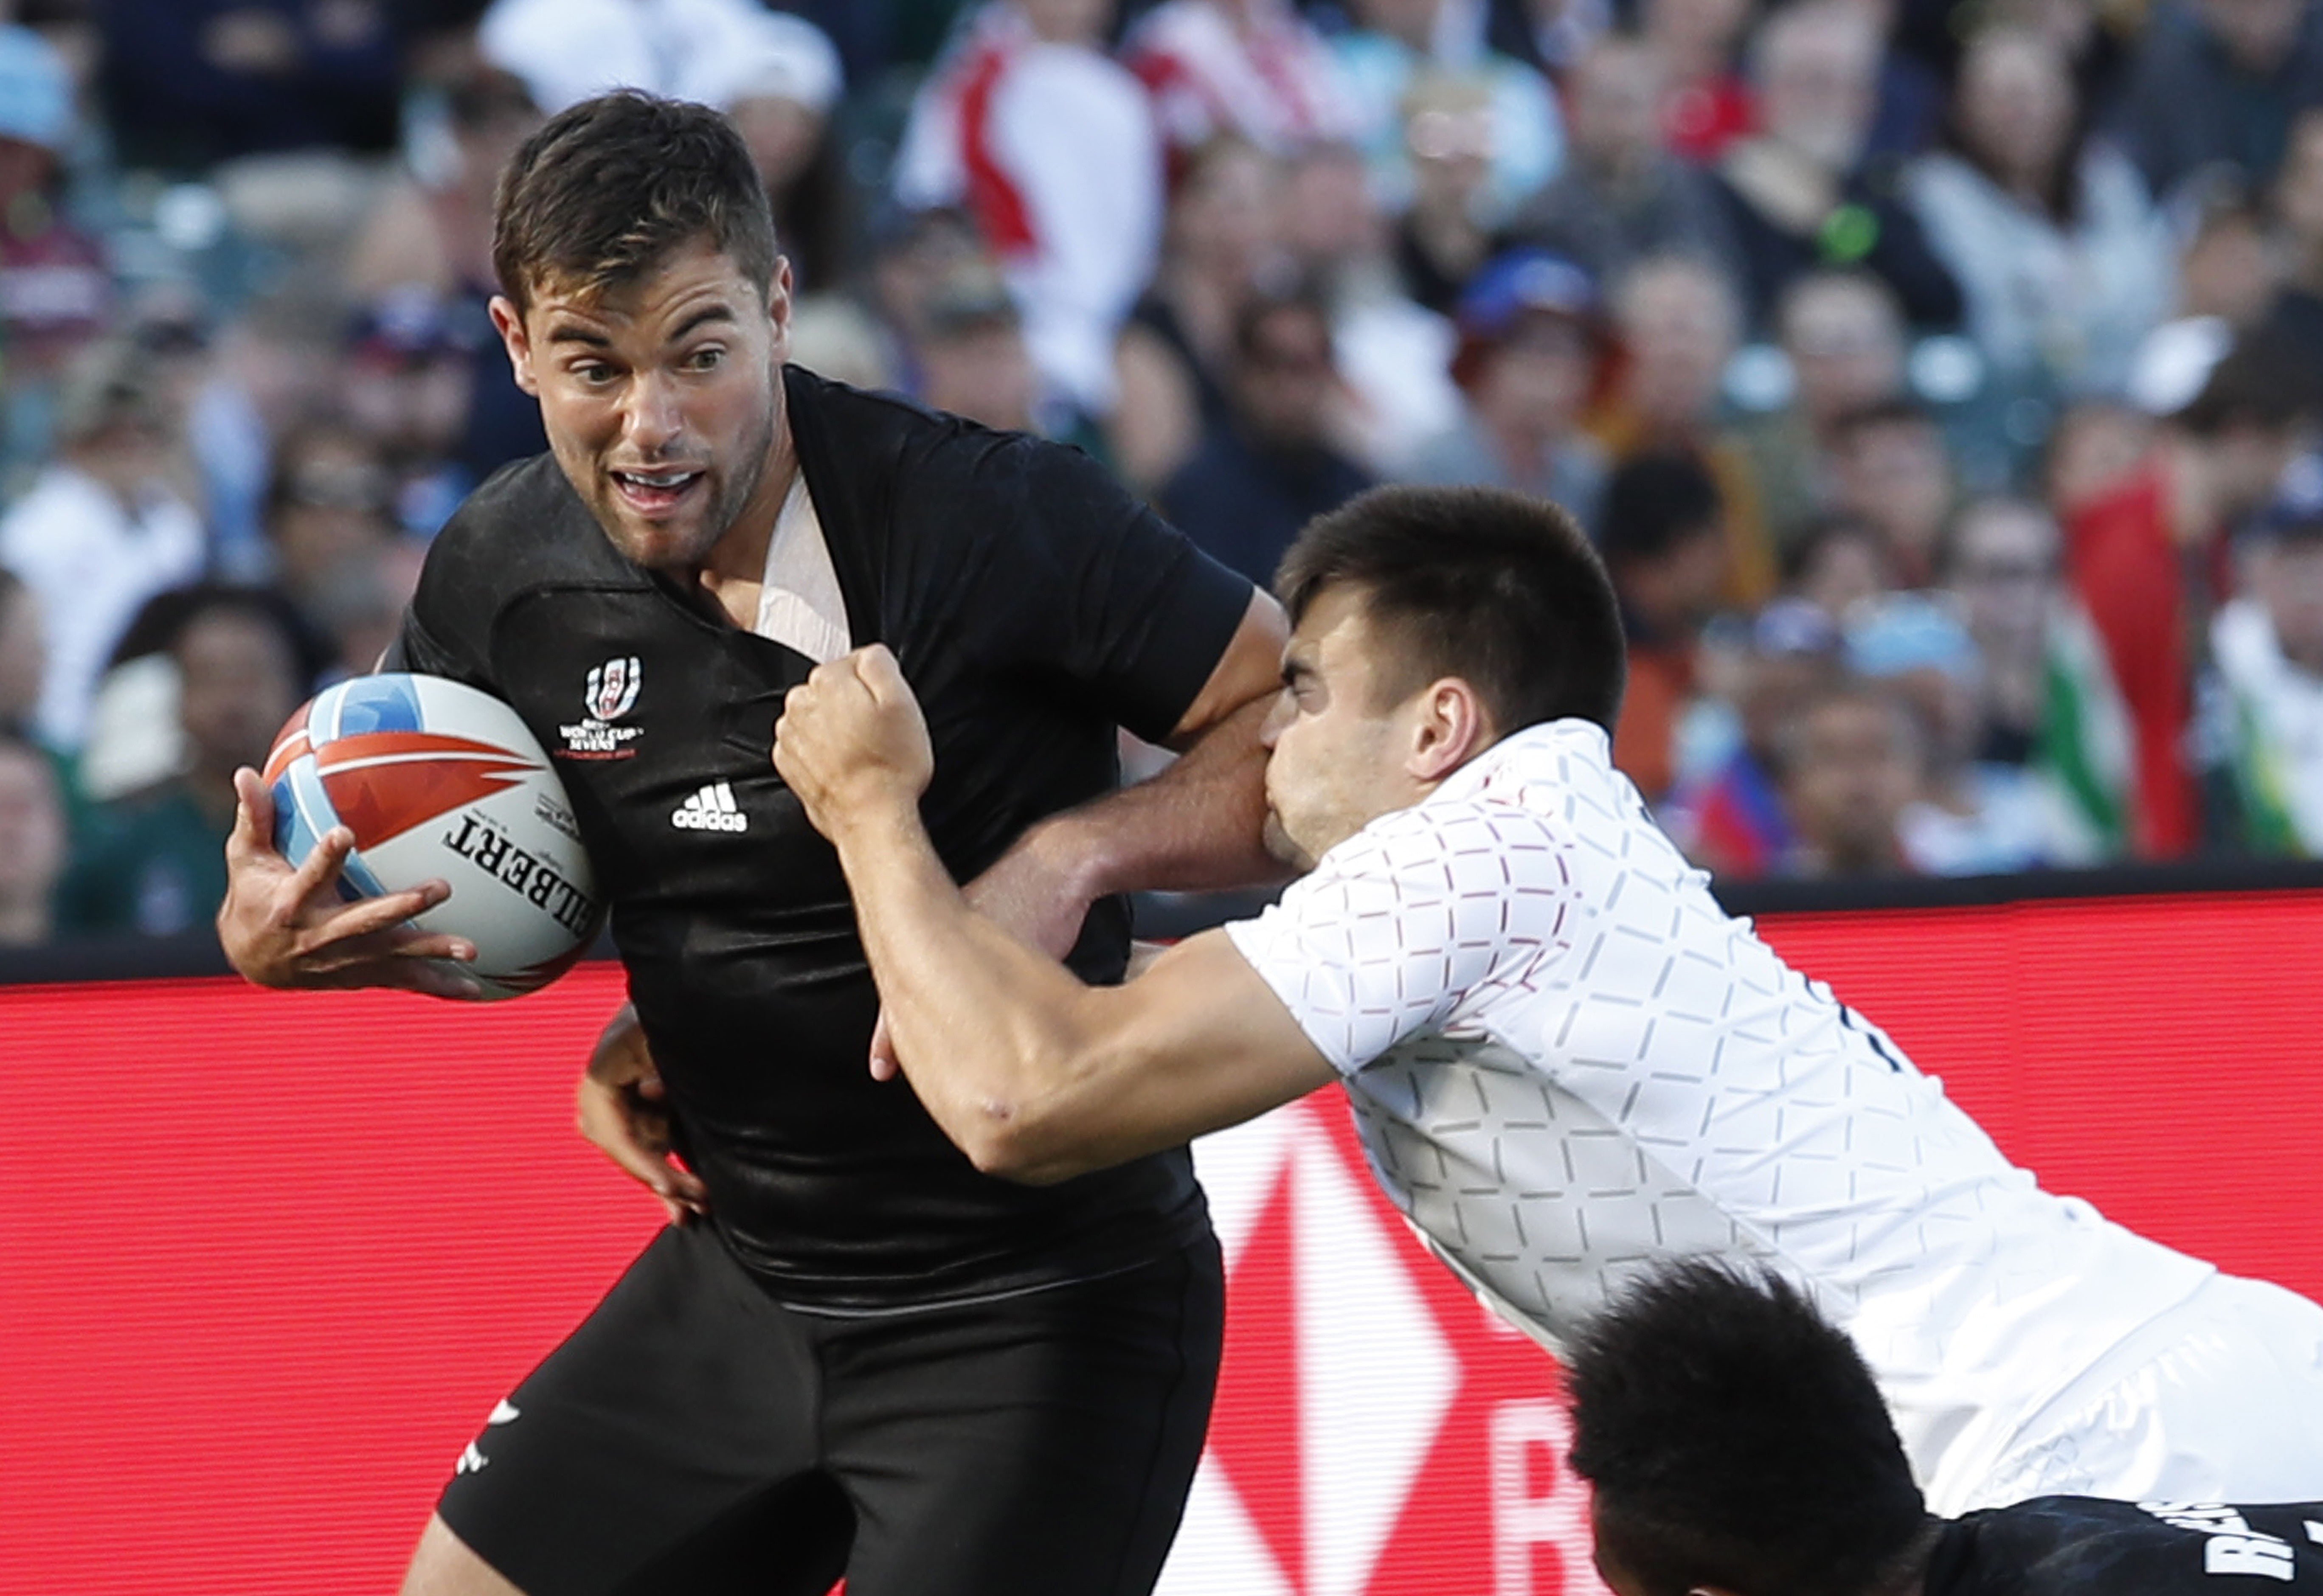 Andrew Knewstubb (left) of New Zealand holds off England’s William Muir during the Rugby World Cup Sevens final. Photo: EPA